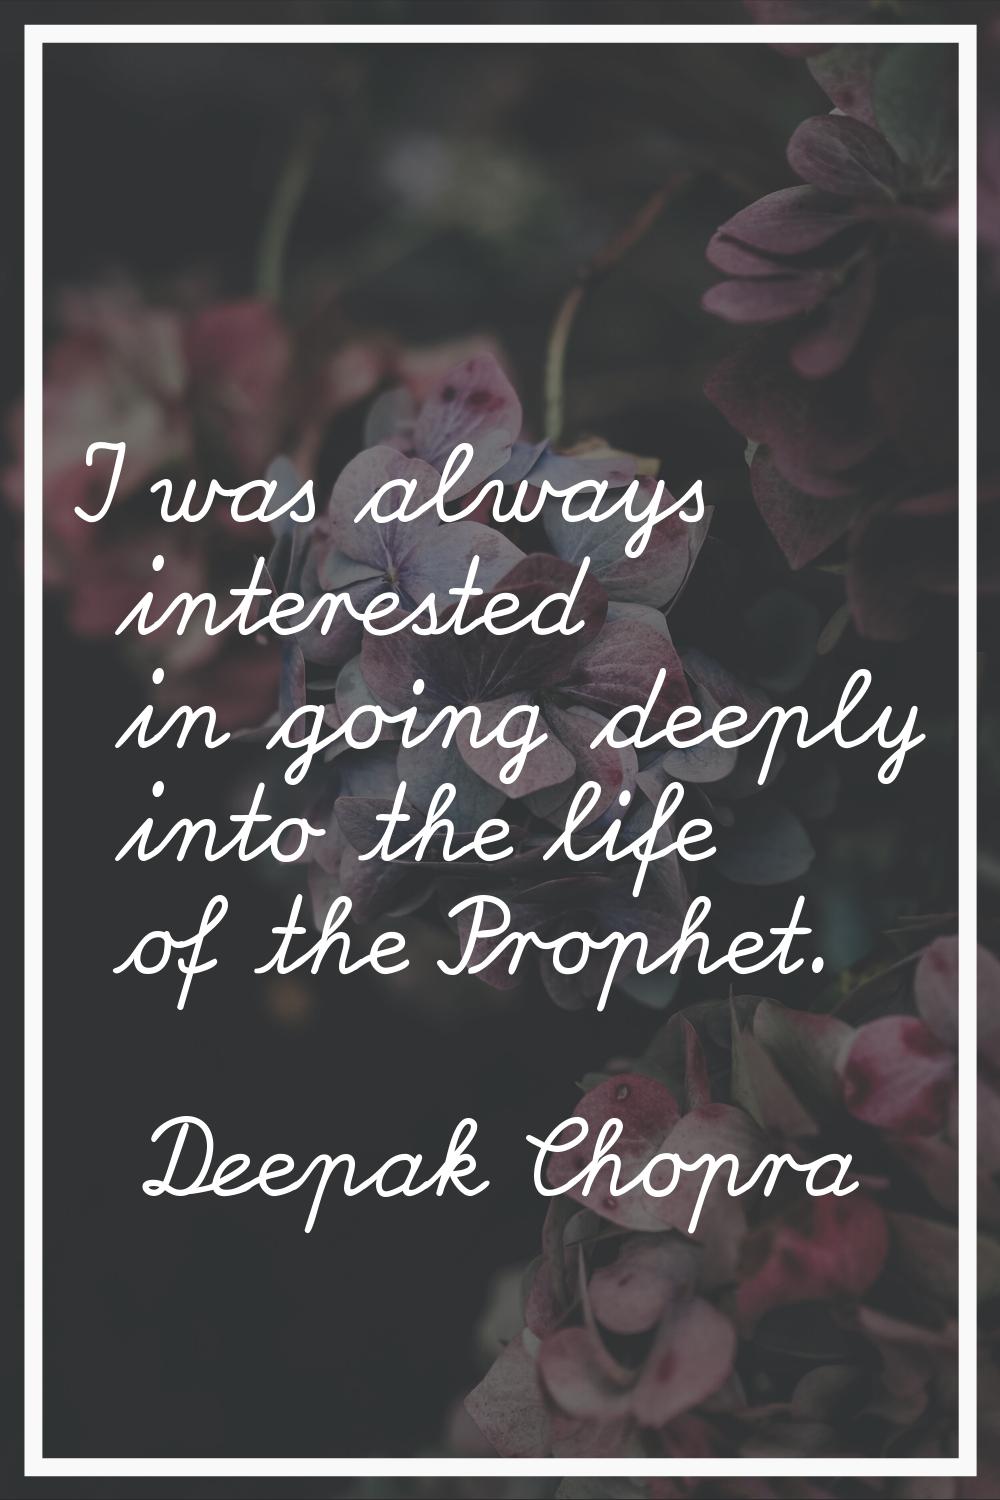 I was always interested in going deeply into the life of the Prophet.